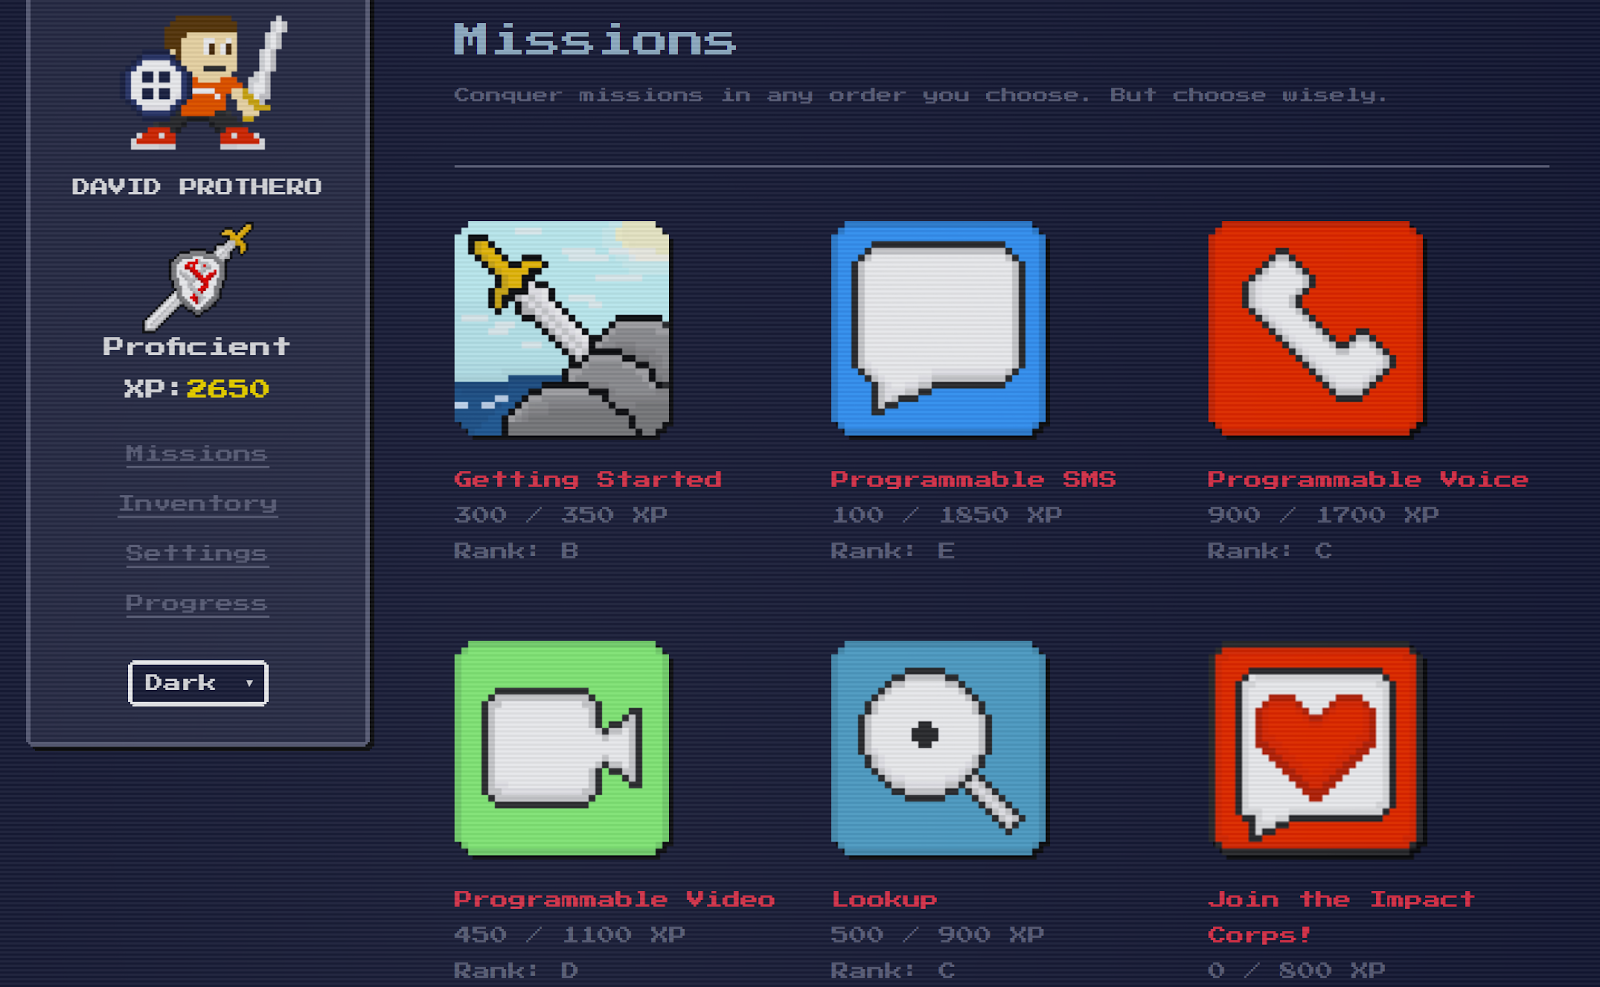 Select TwilioQuest missions to learn communications products quickly.